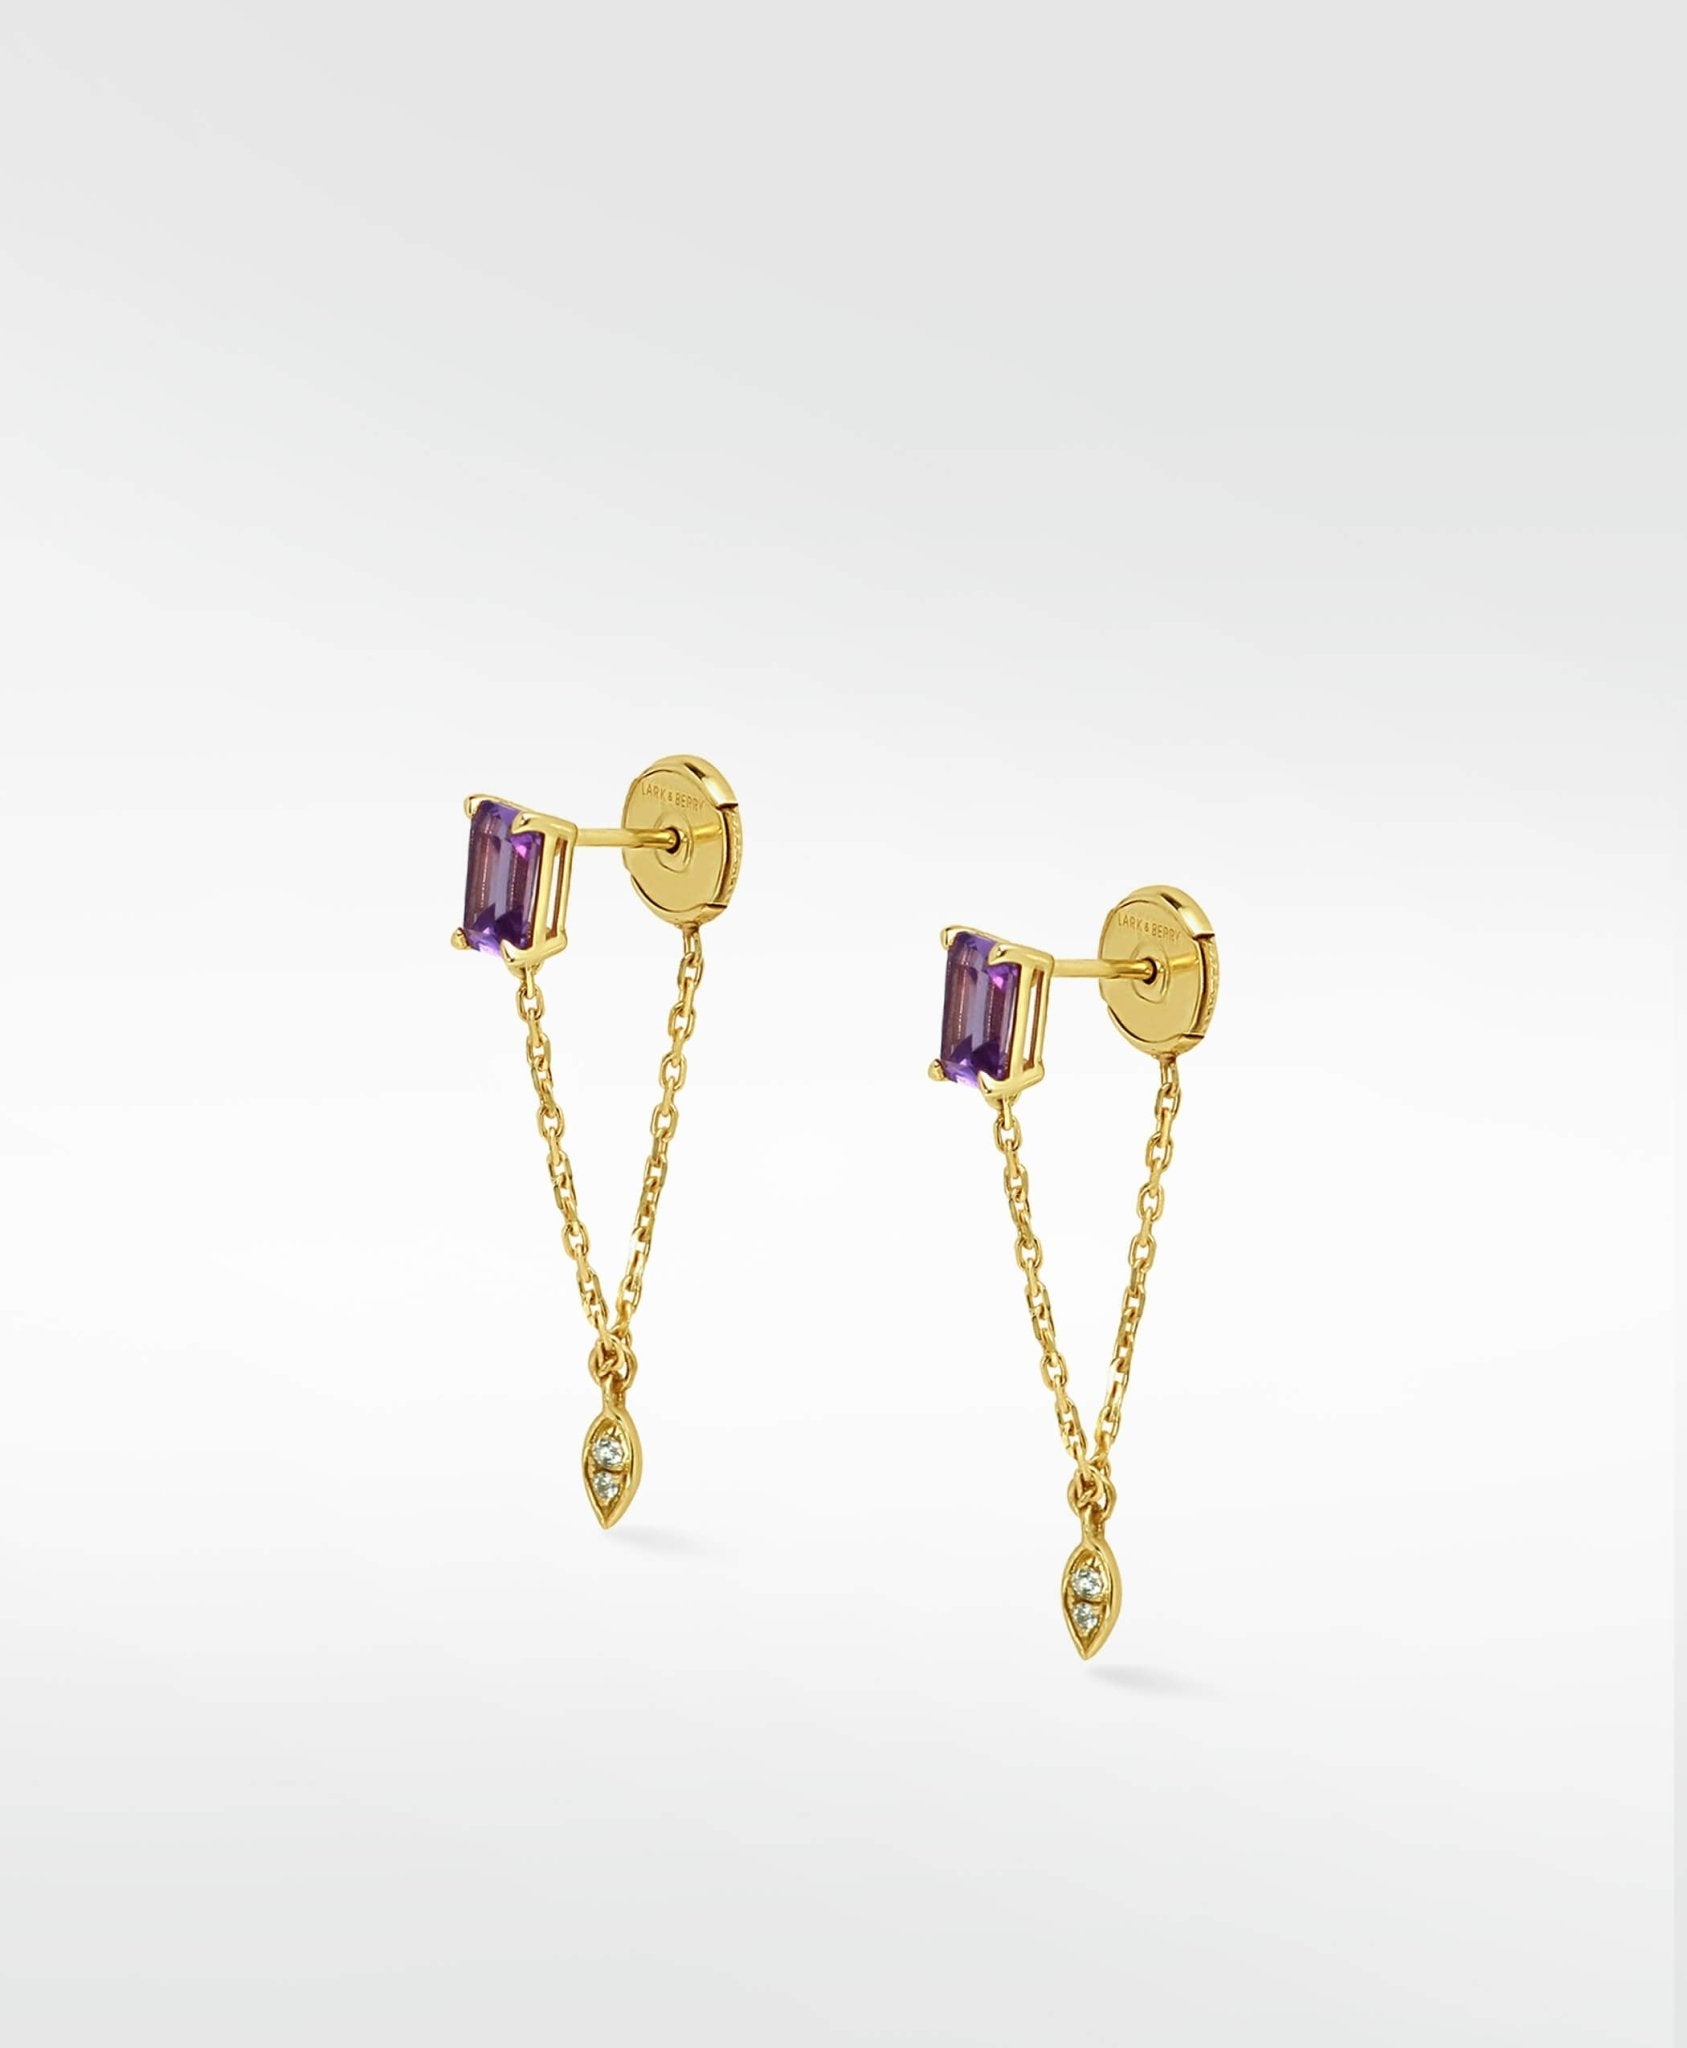 Alicia Violet Sapphire and Diamond Chain Earrings in 14K Gold - Lark and Berry